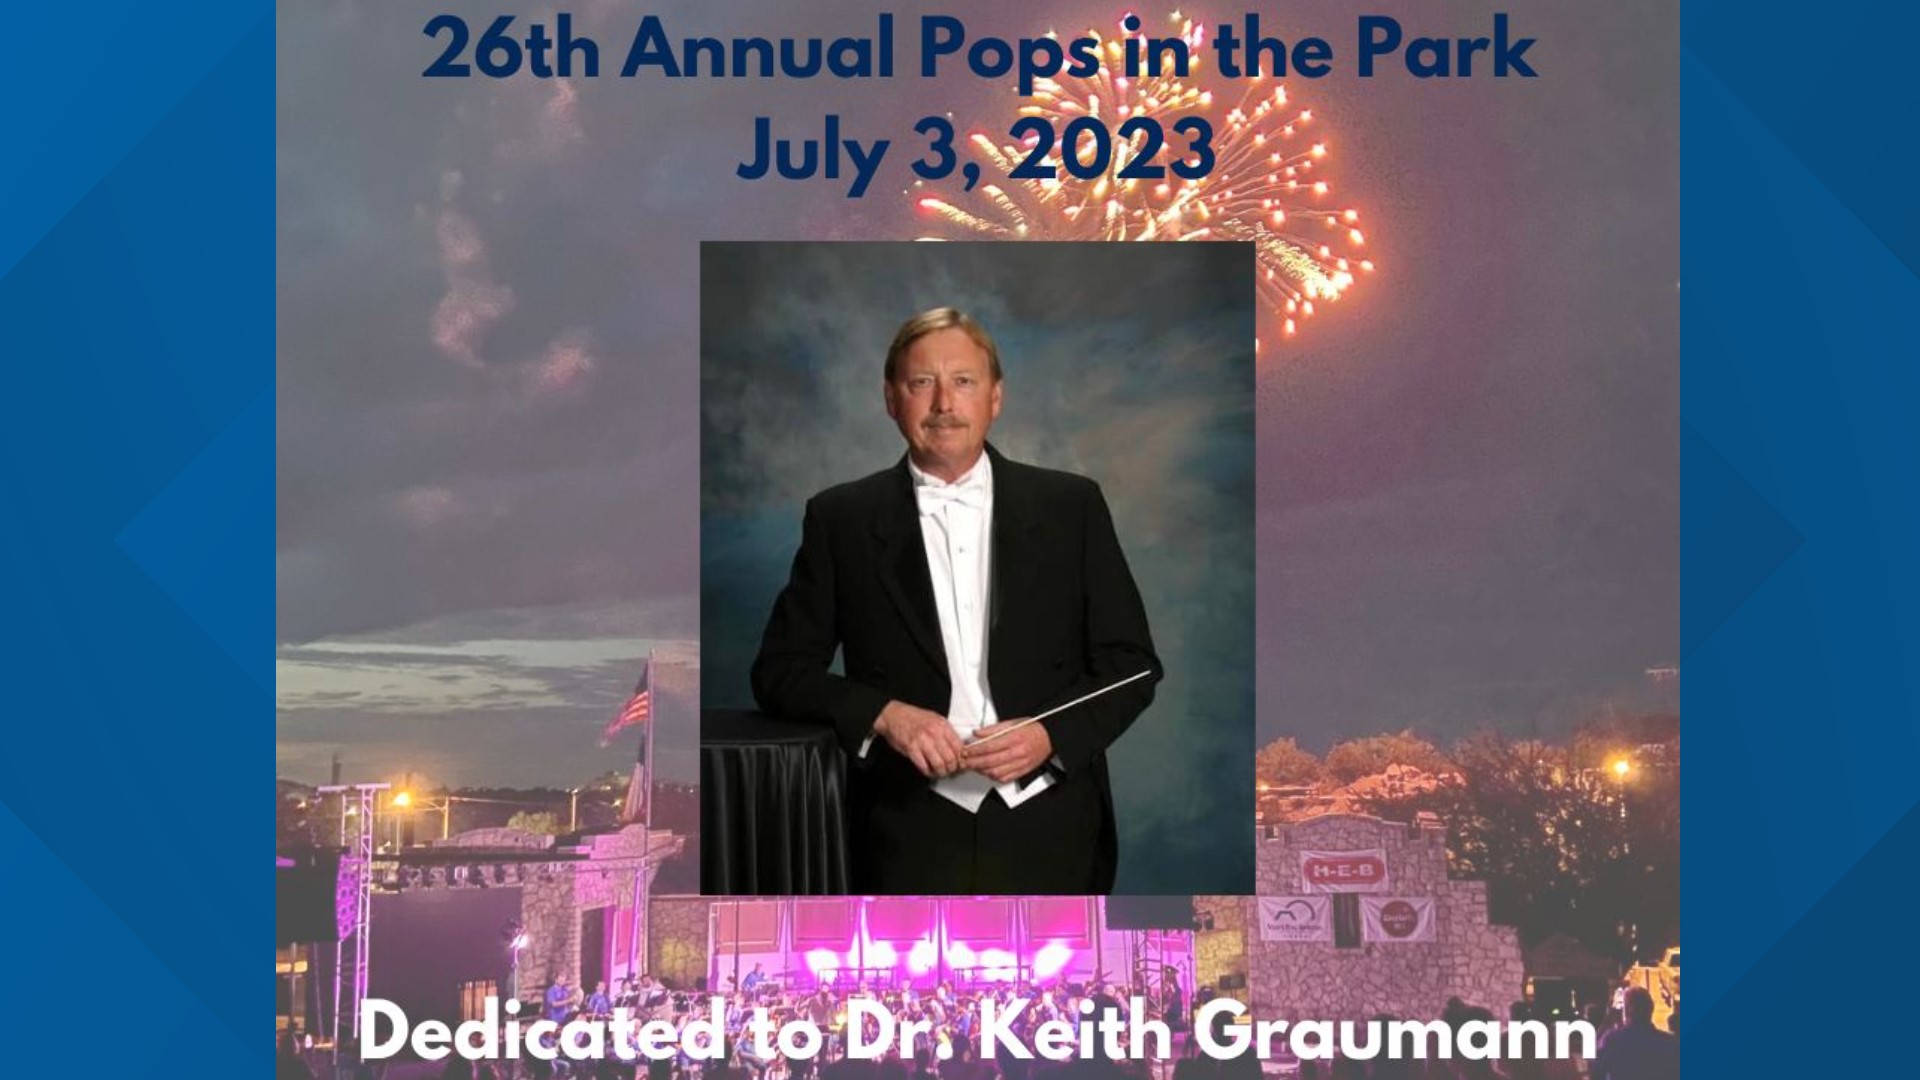 This year's event will honor longtime director and conductor of the Big Spring Symphony Dr. Keith Graumann, who died in March.